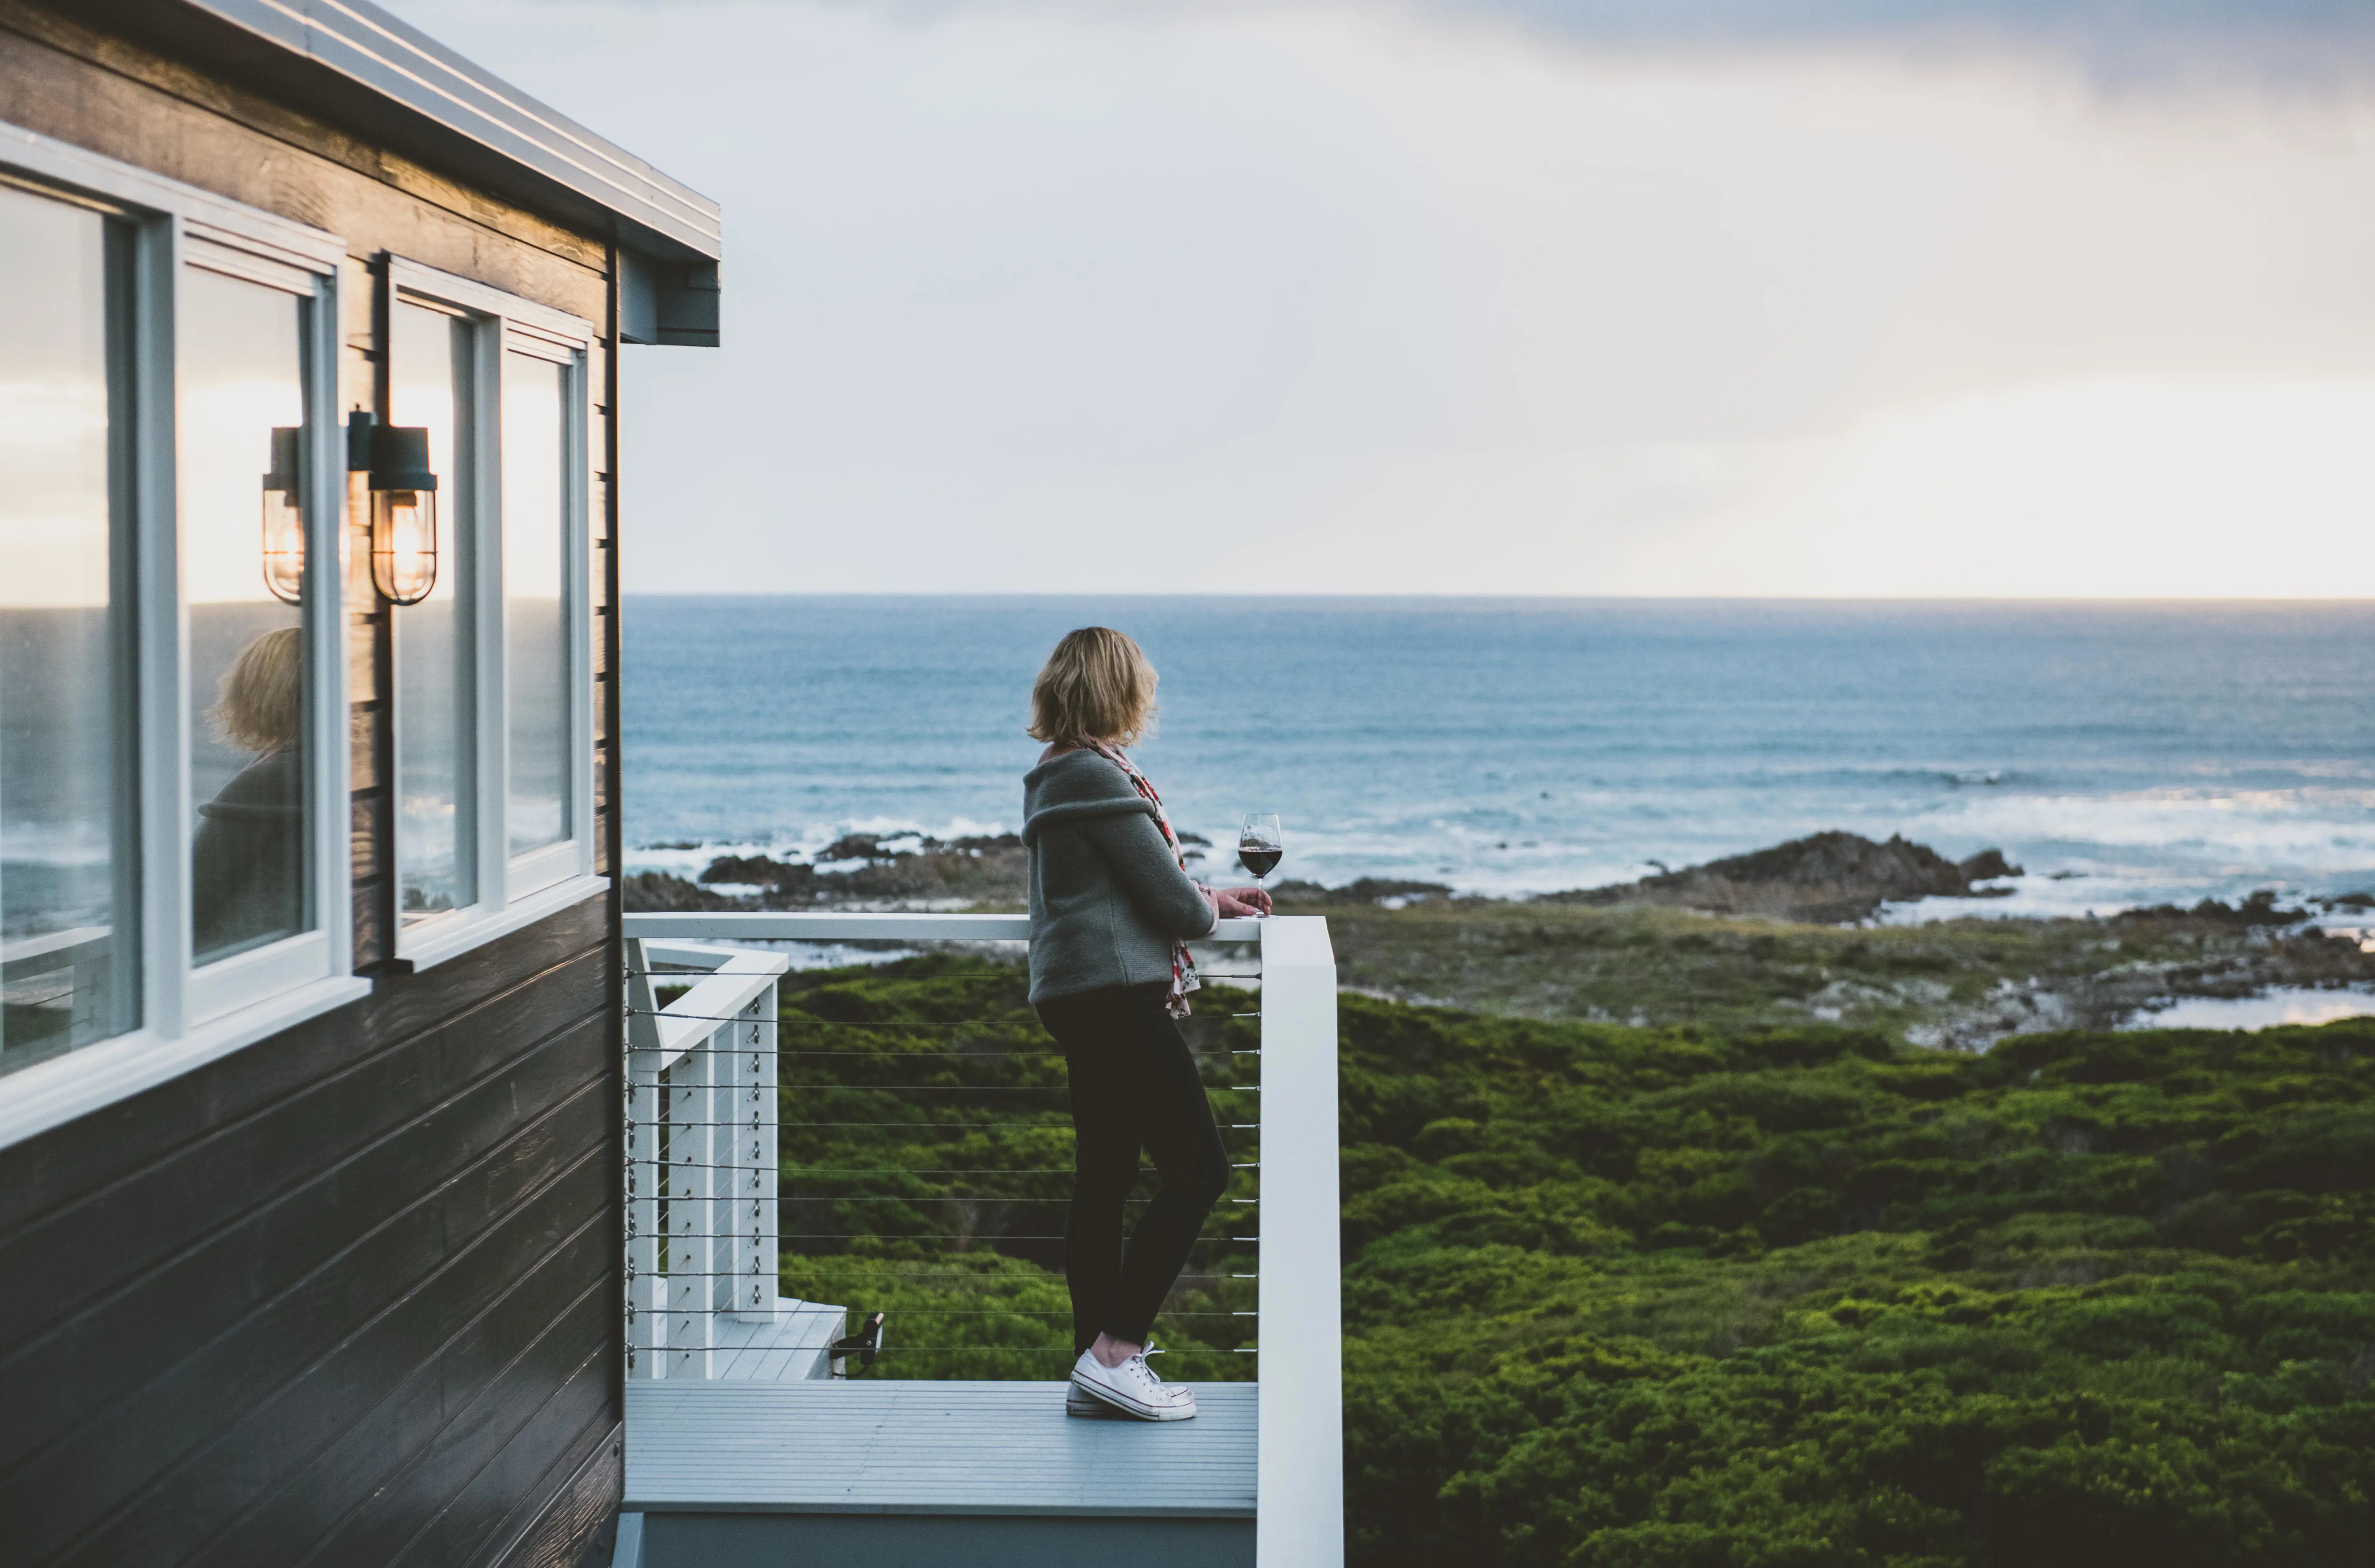 A woman stands at the top of a flight of stairs on a verandah overlooking a rugged ocean coastline.